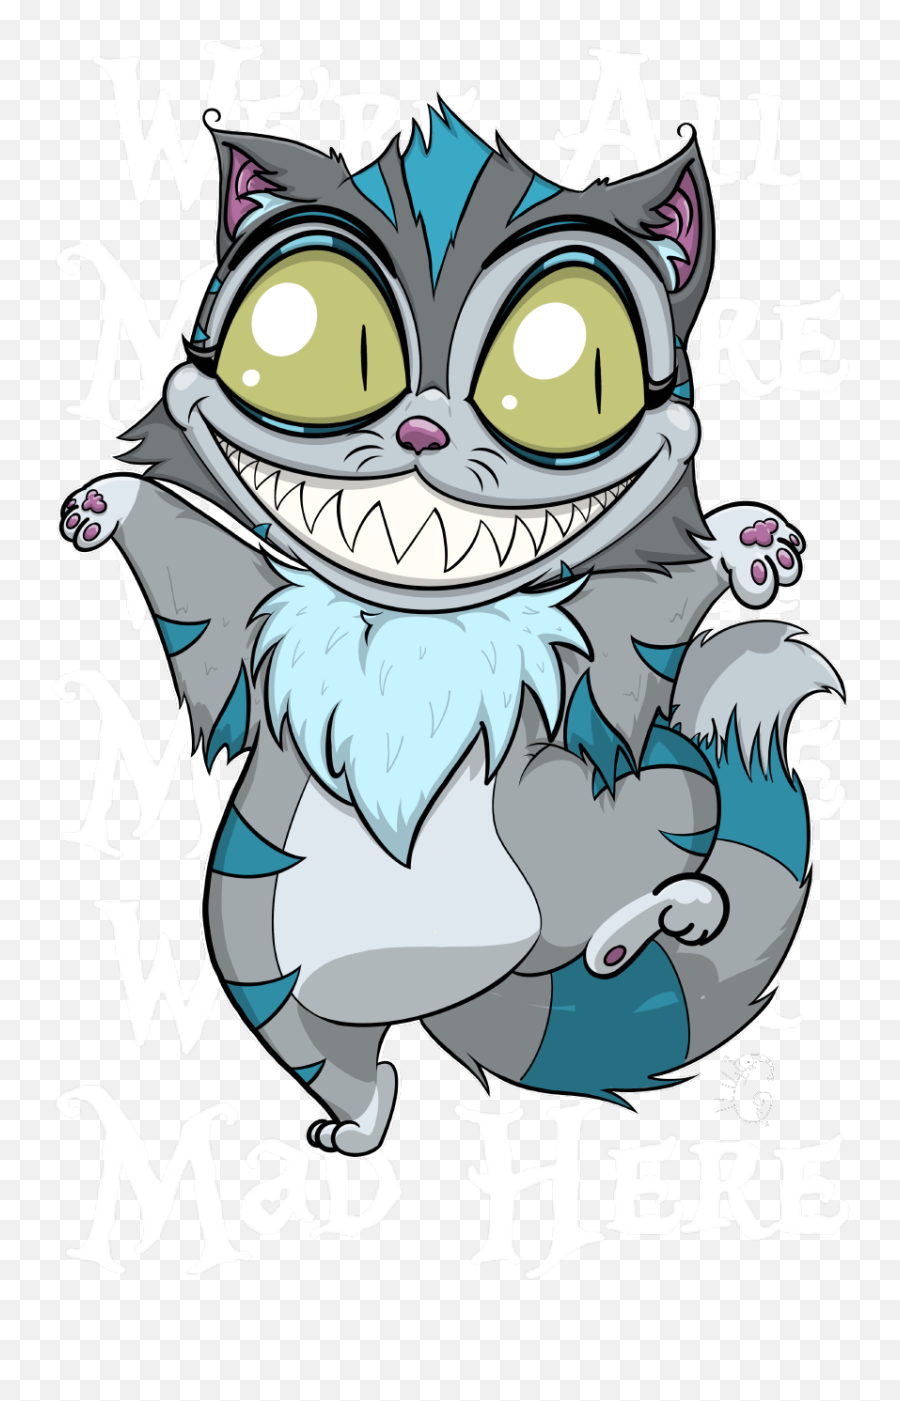 Home Camilleu0027s Cute And Creepy Creations - Fictional Character Emoji,Cheshire Cat Emoticon